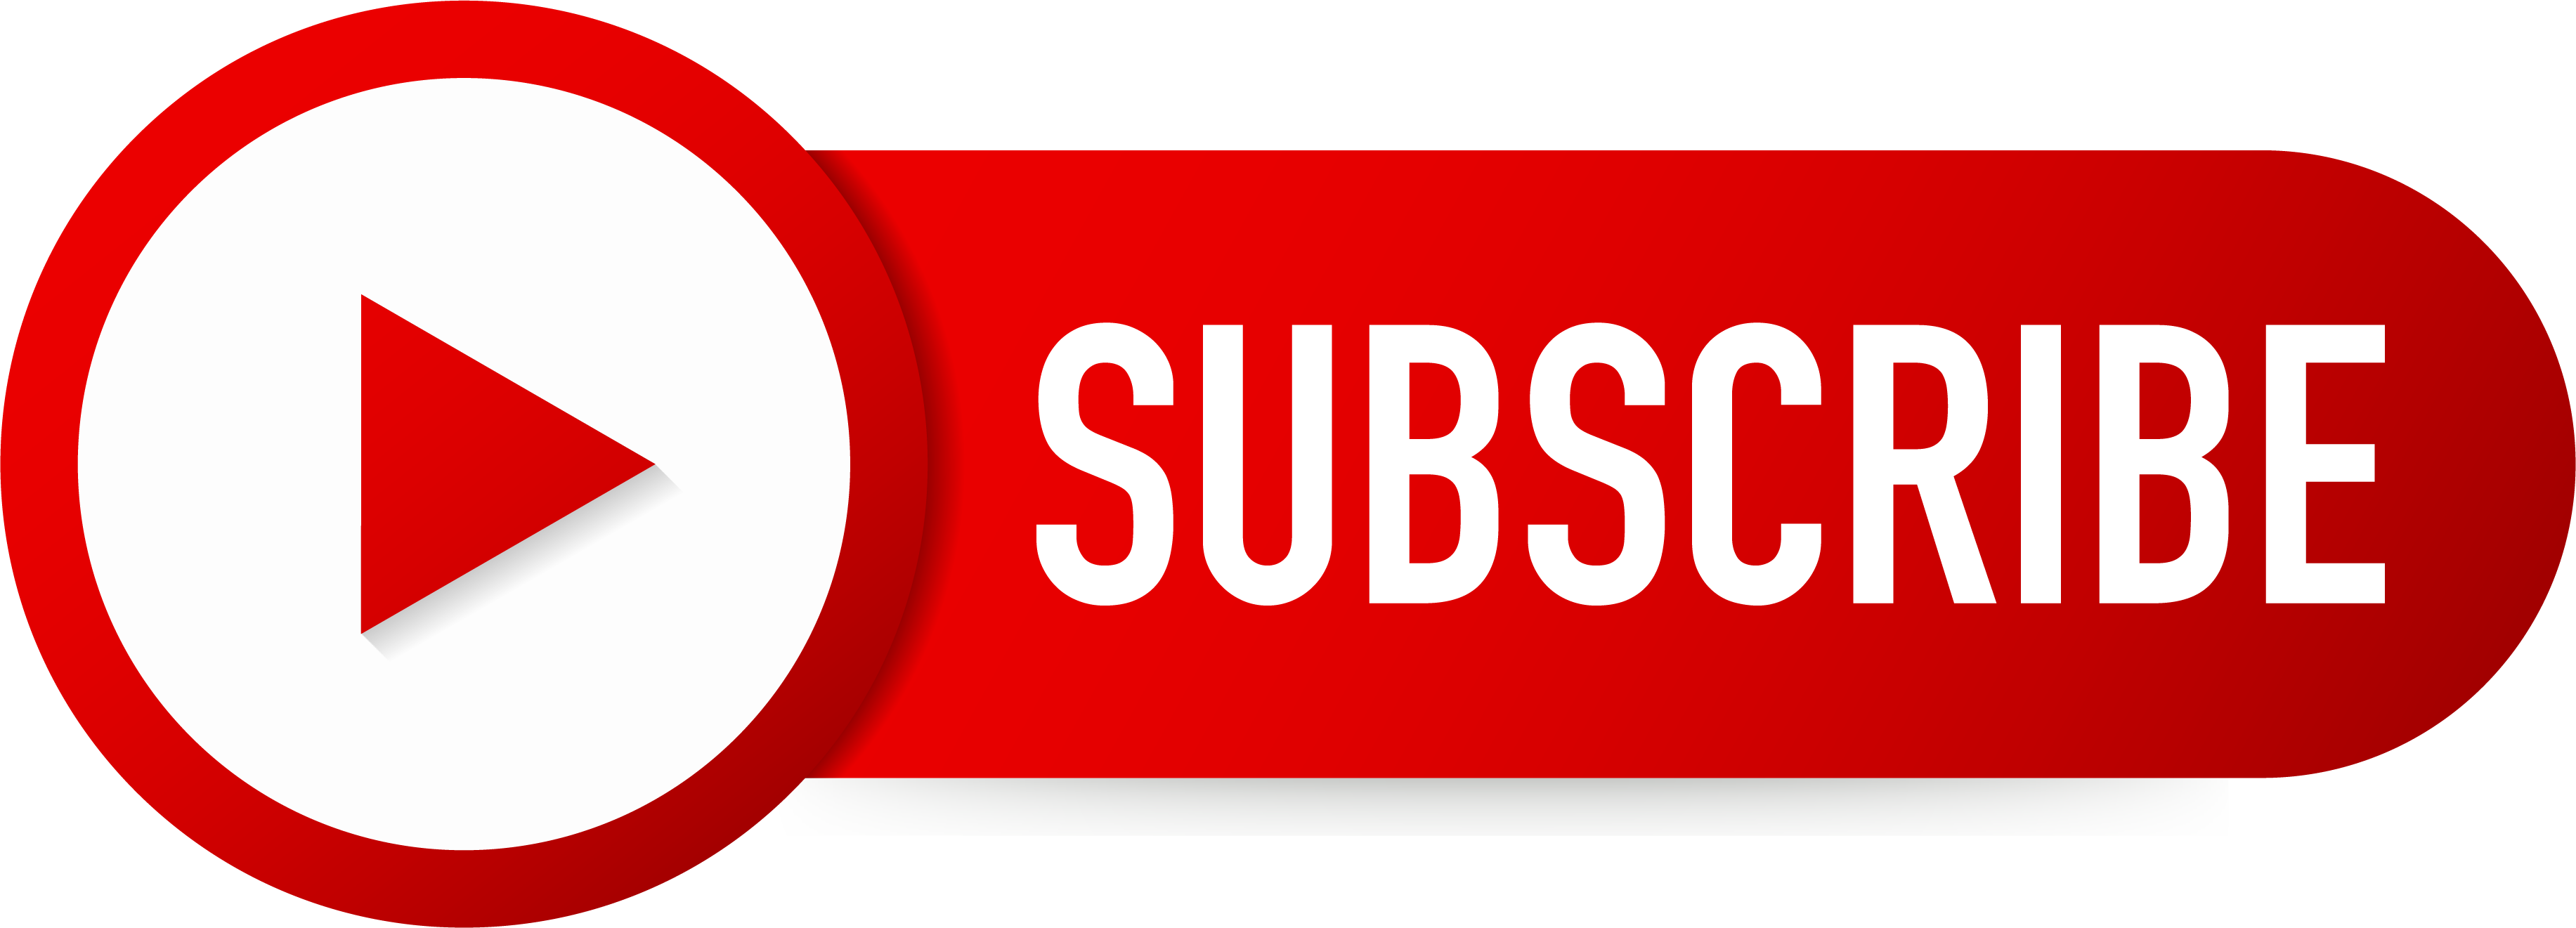 Download Youtube Subscribe Button Png File Subscribe Button With Images